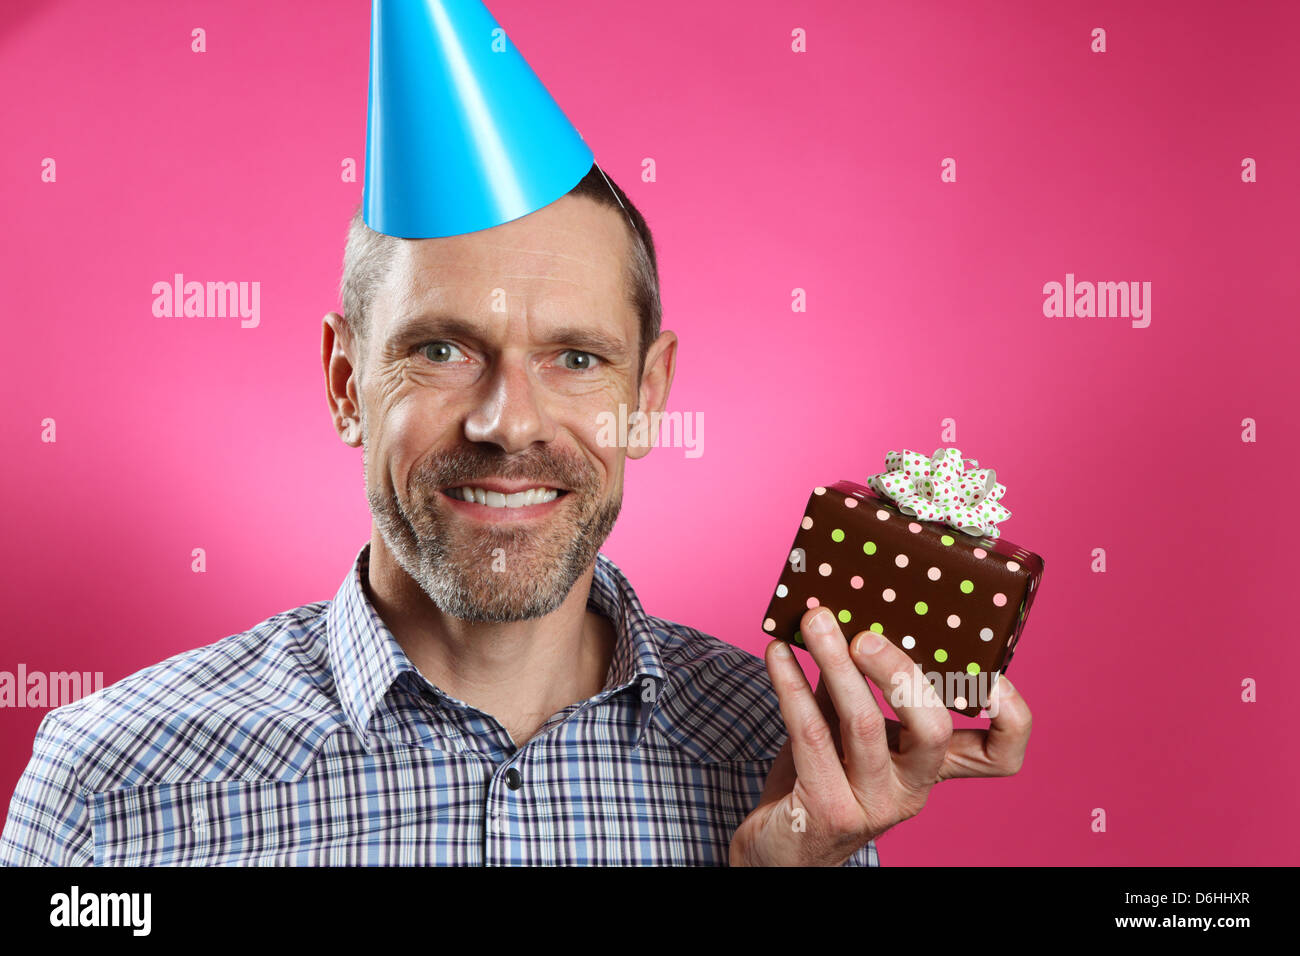 Man wearing a party hat with a toothy smile and holding a gift. Stock Photo